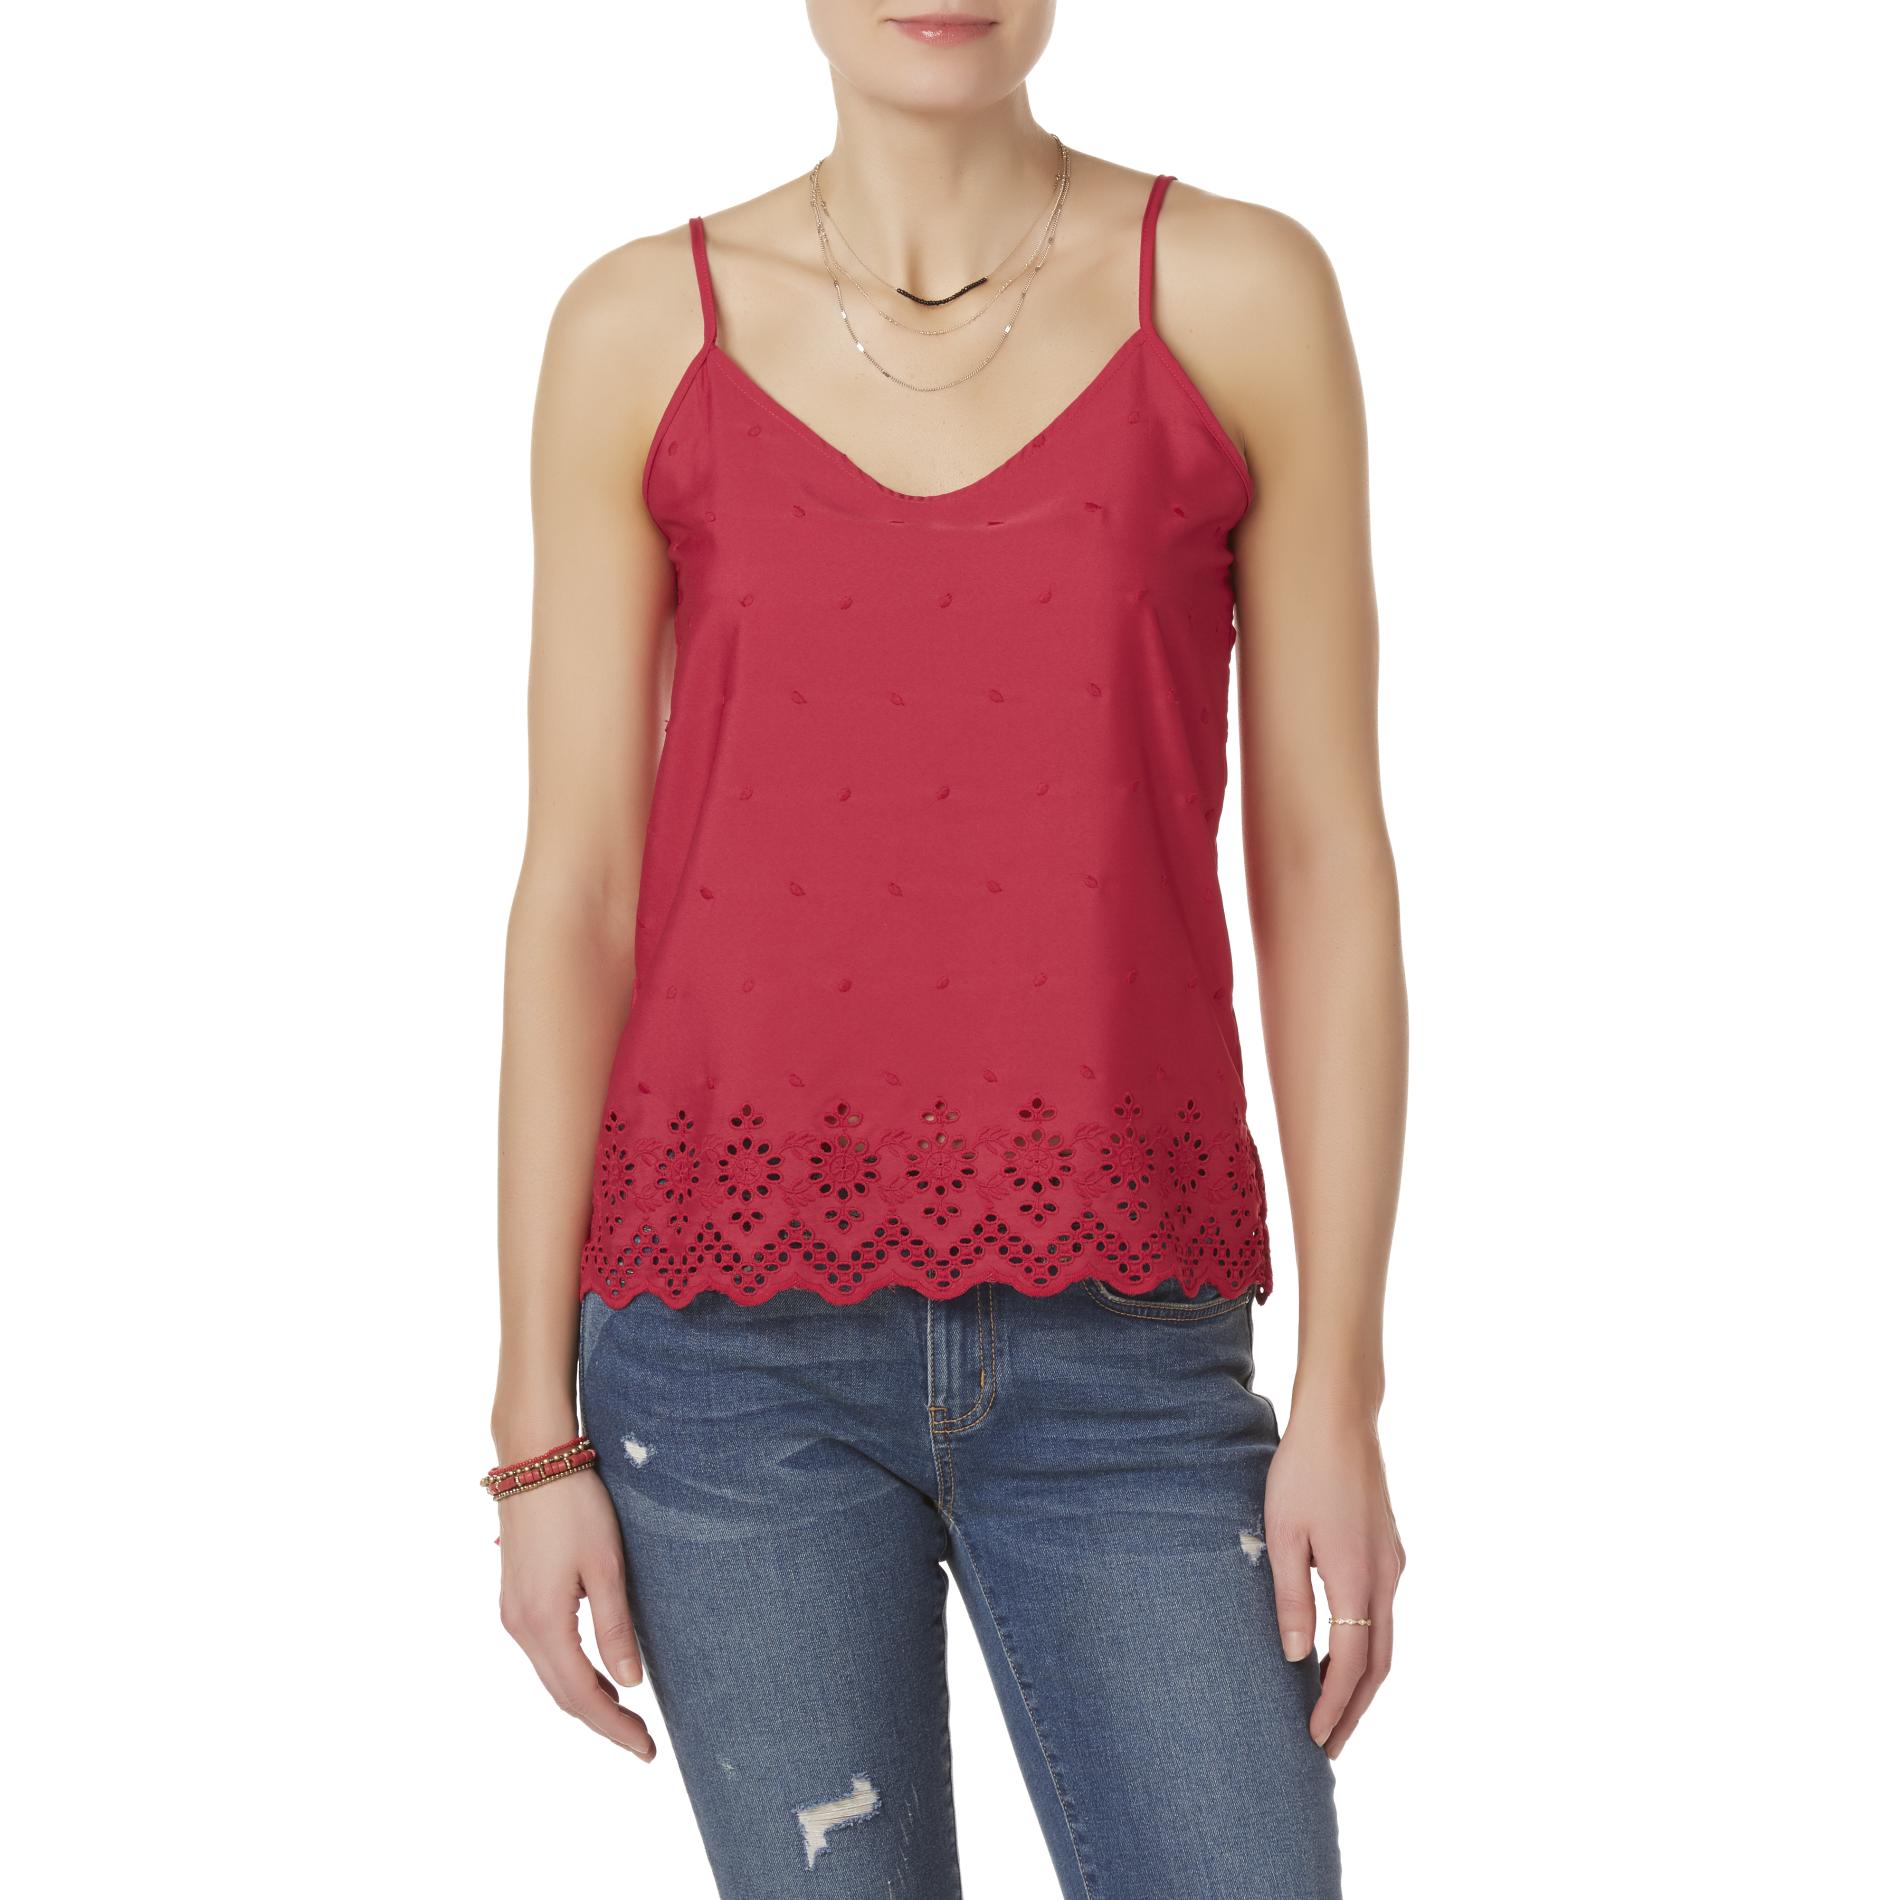 Simply Styled Women's Eyelet Camisole